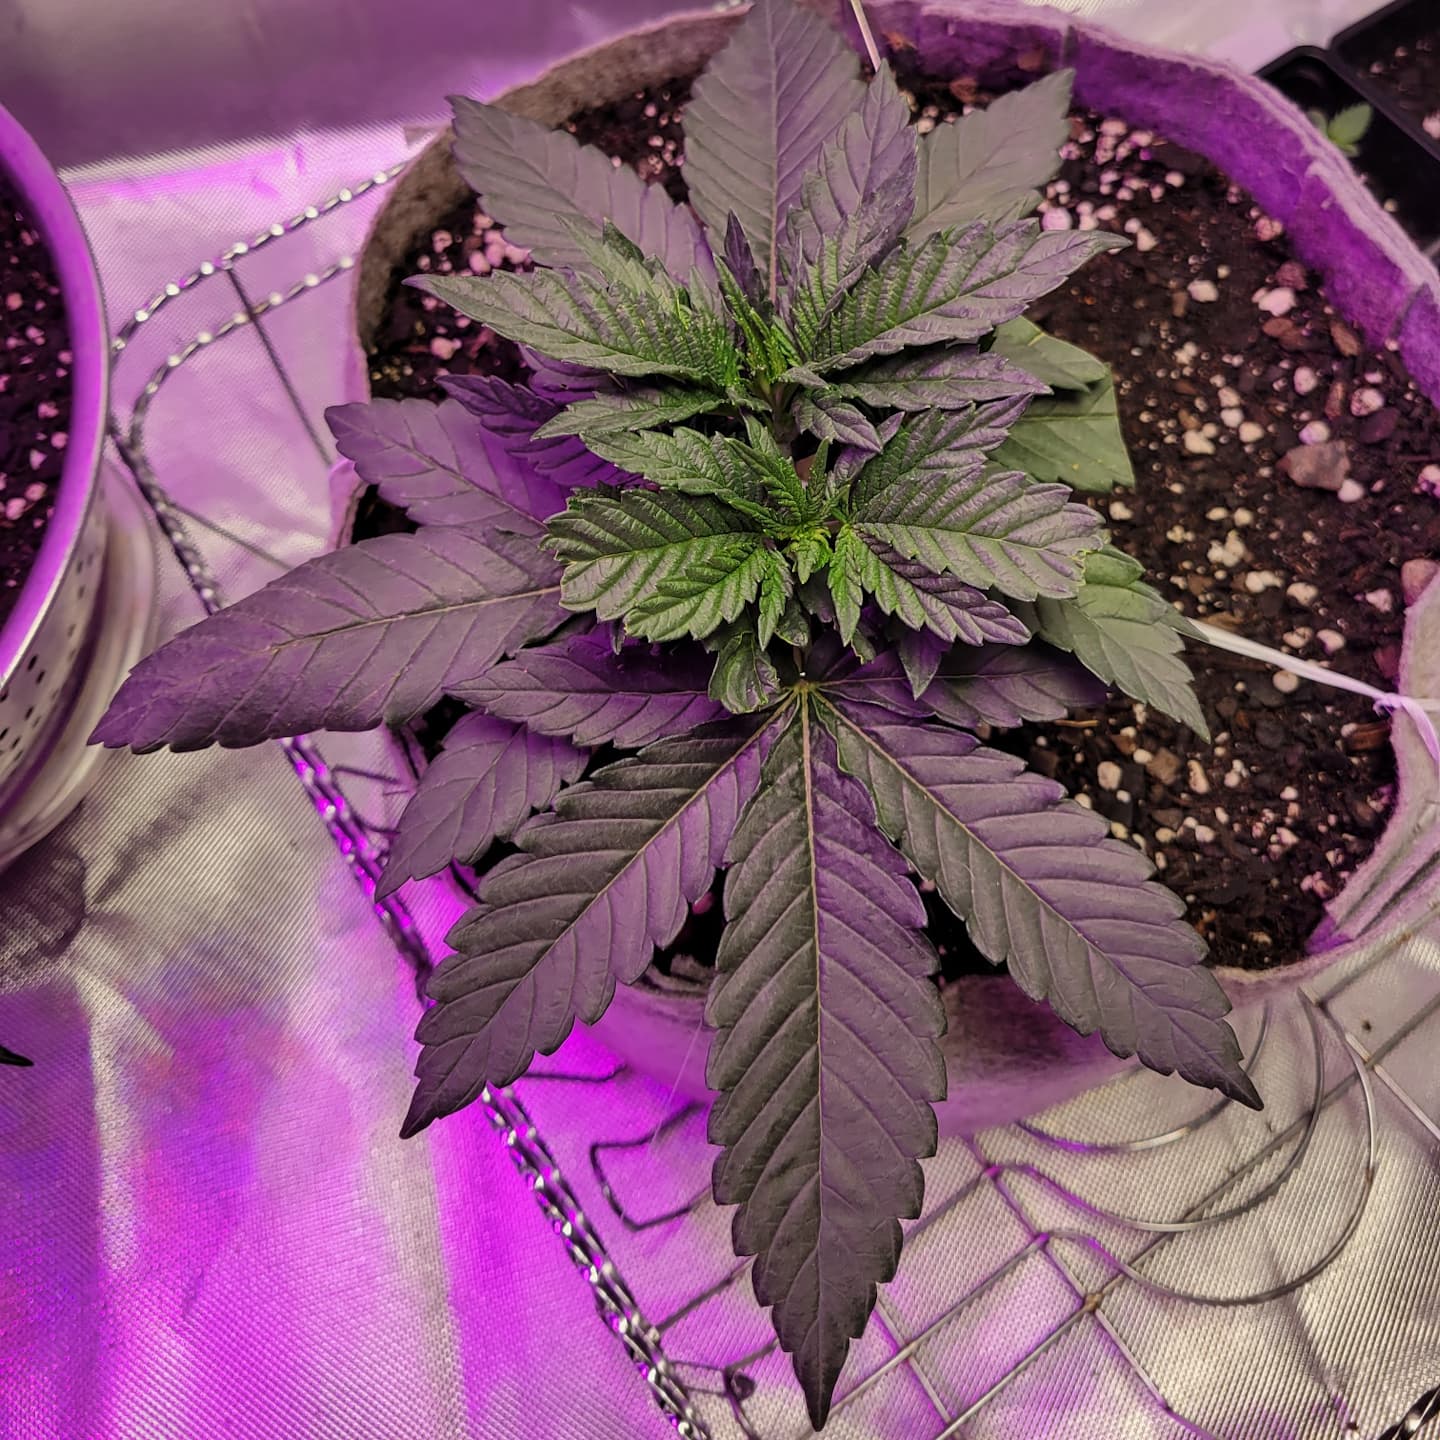 Question about plant sexing age